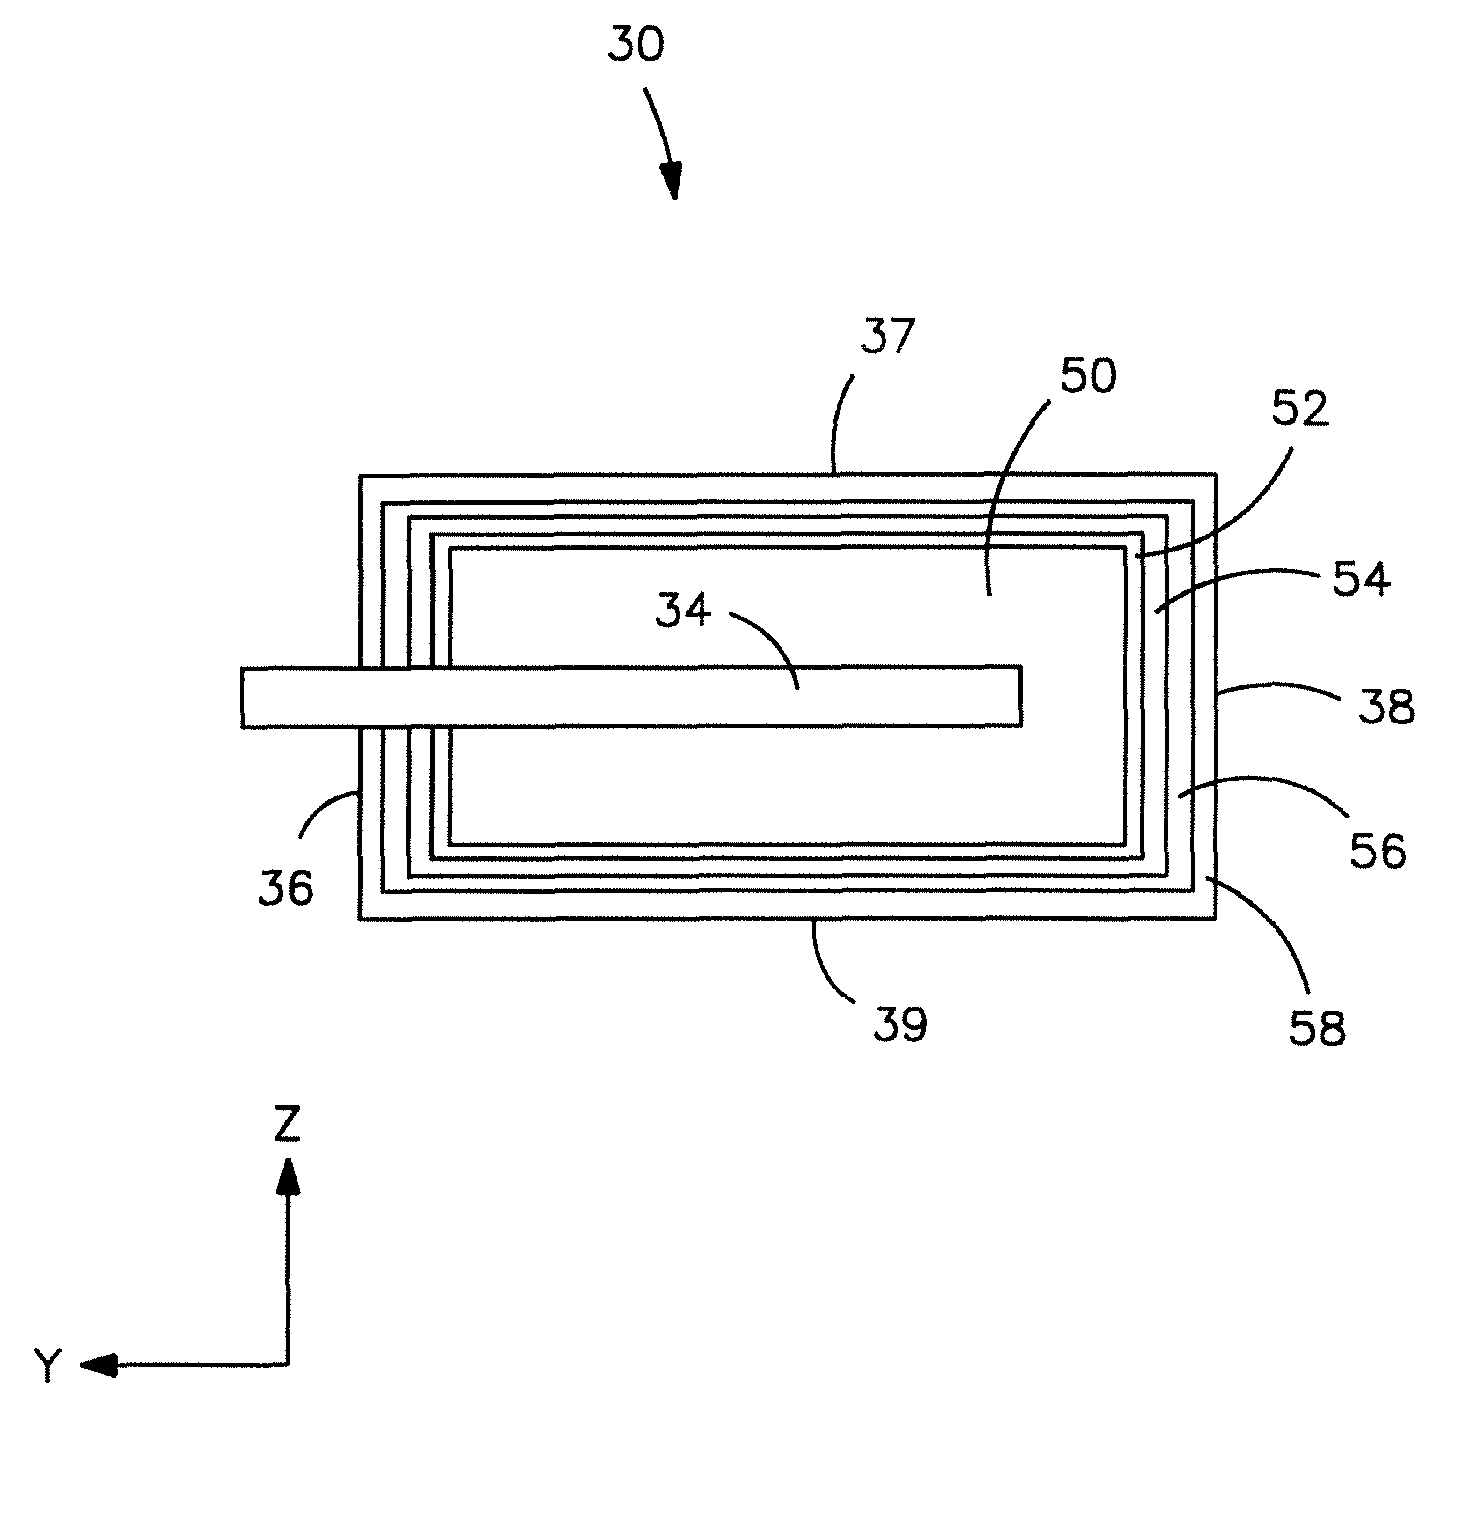 Sintered anode pellet etched with an organic acid for use in an electrolytic capacitor